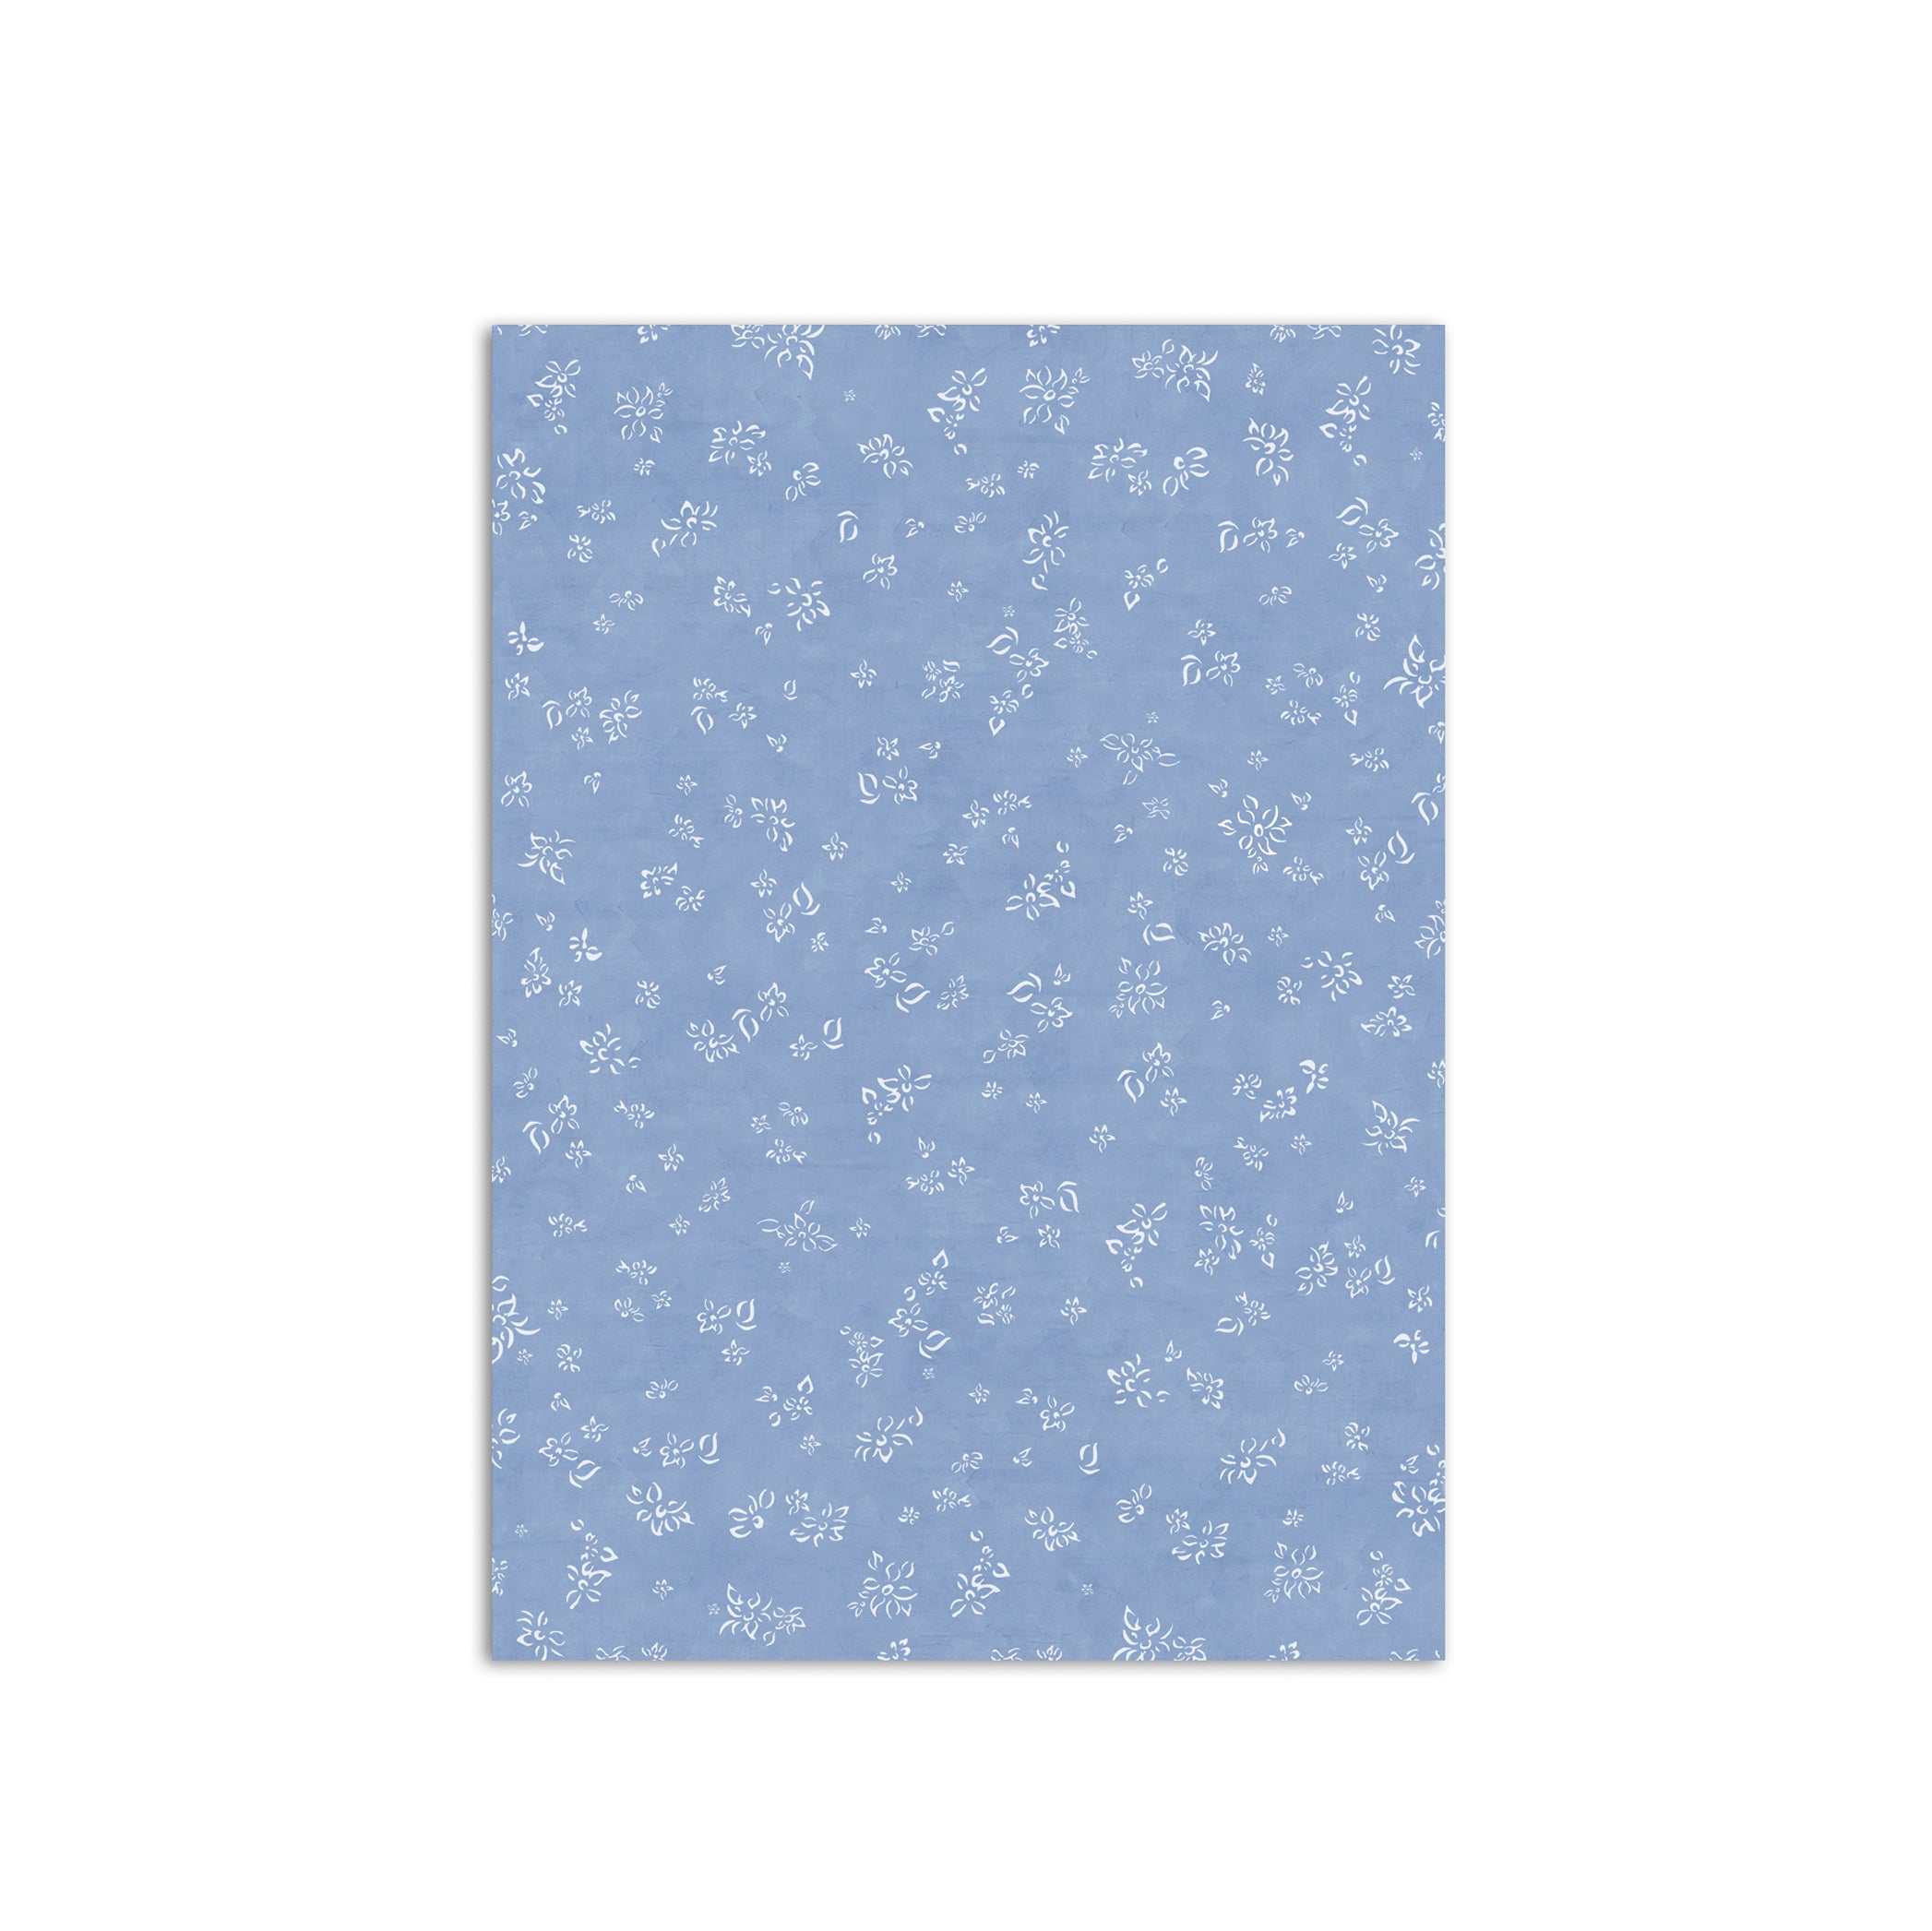 Summerill & Bishop Falling Flower Wrapping Paper in Powder Blue, Roll of 4